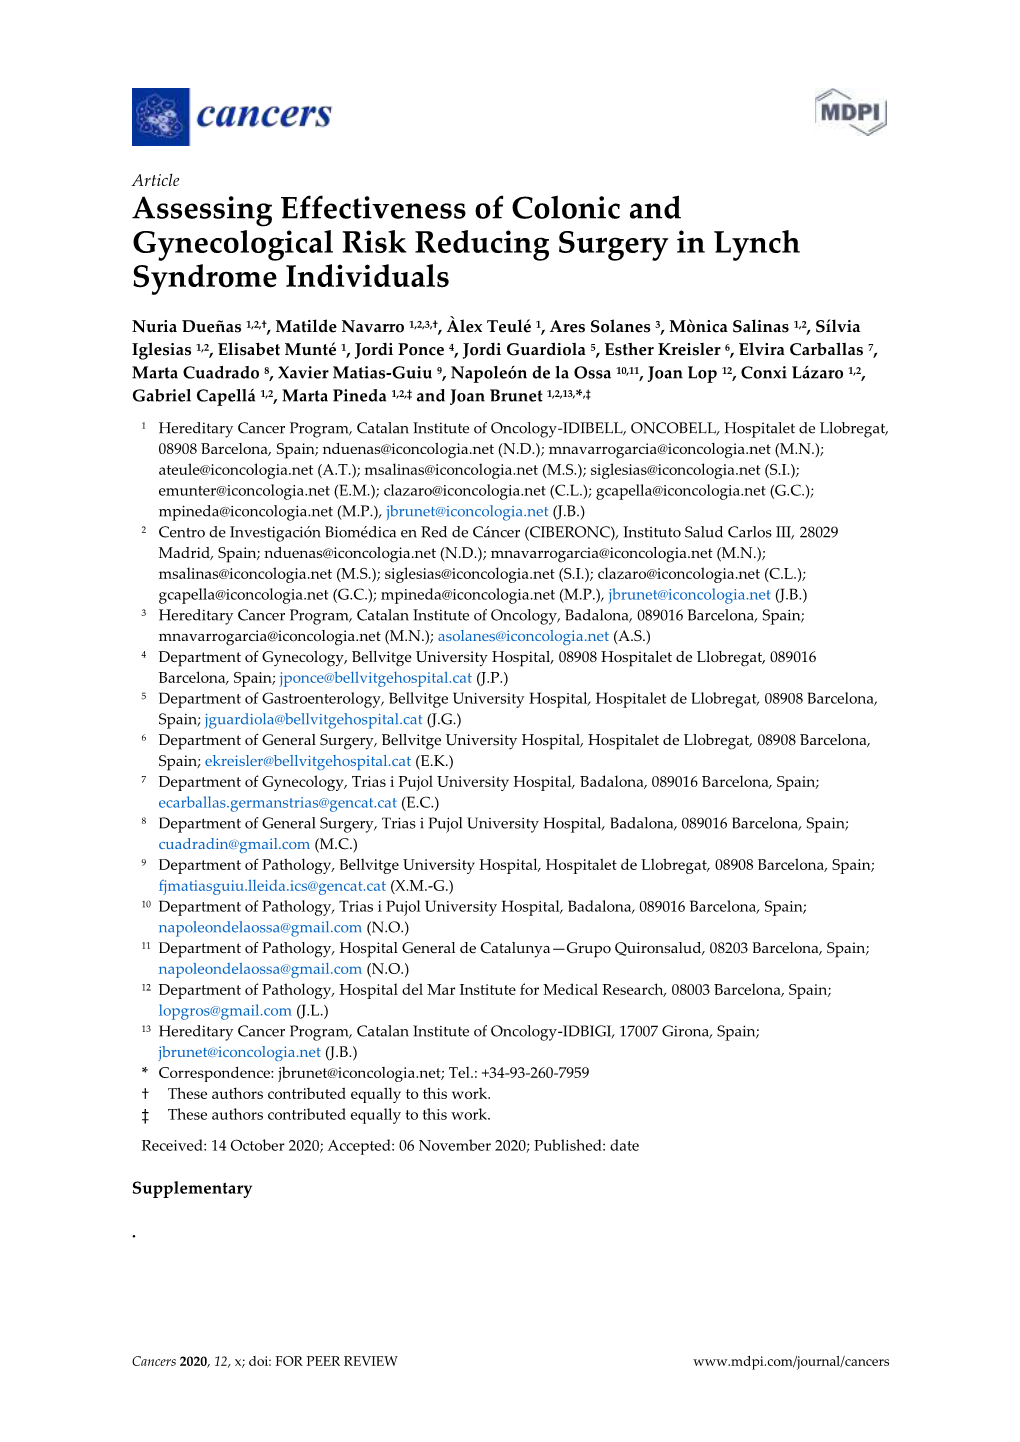 Assessing Effectiveness of Colonic and Gynecological Risk Reducing Surgery in Lynch Syndrome Individuals